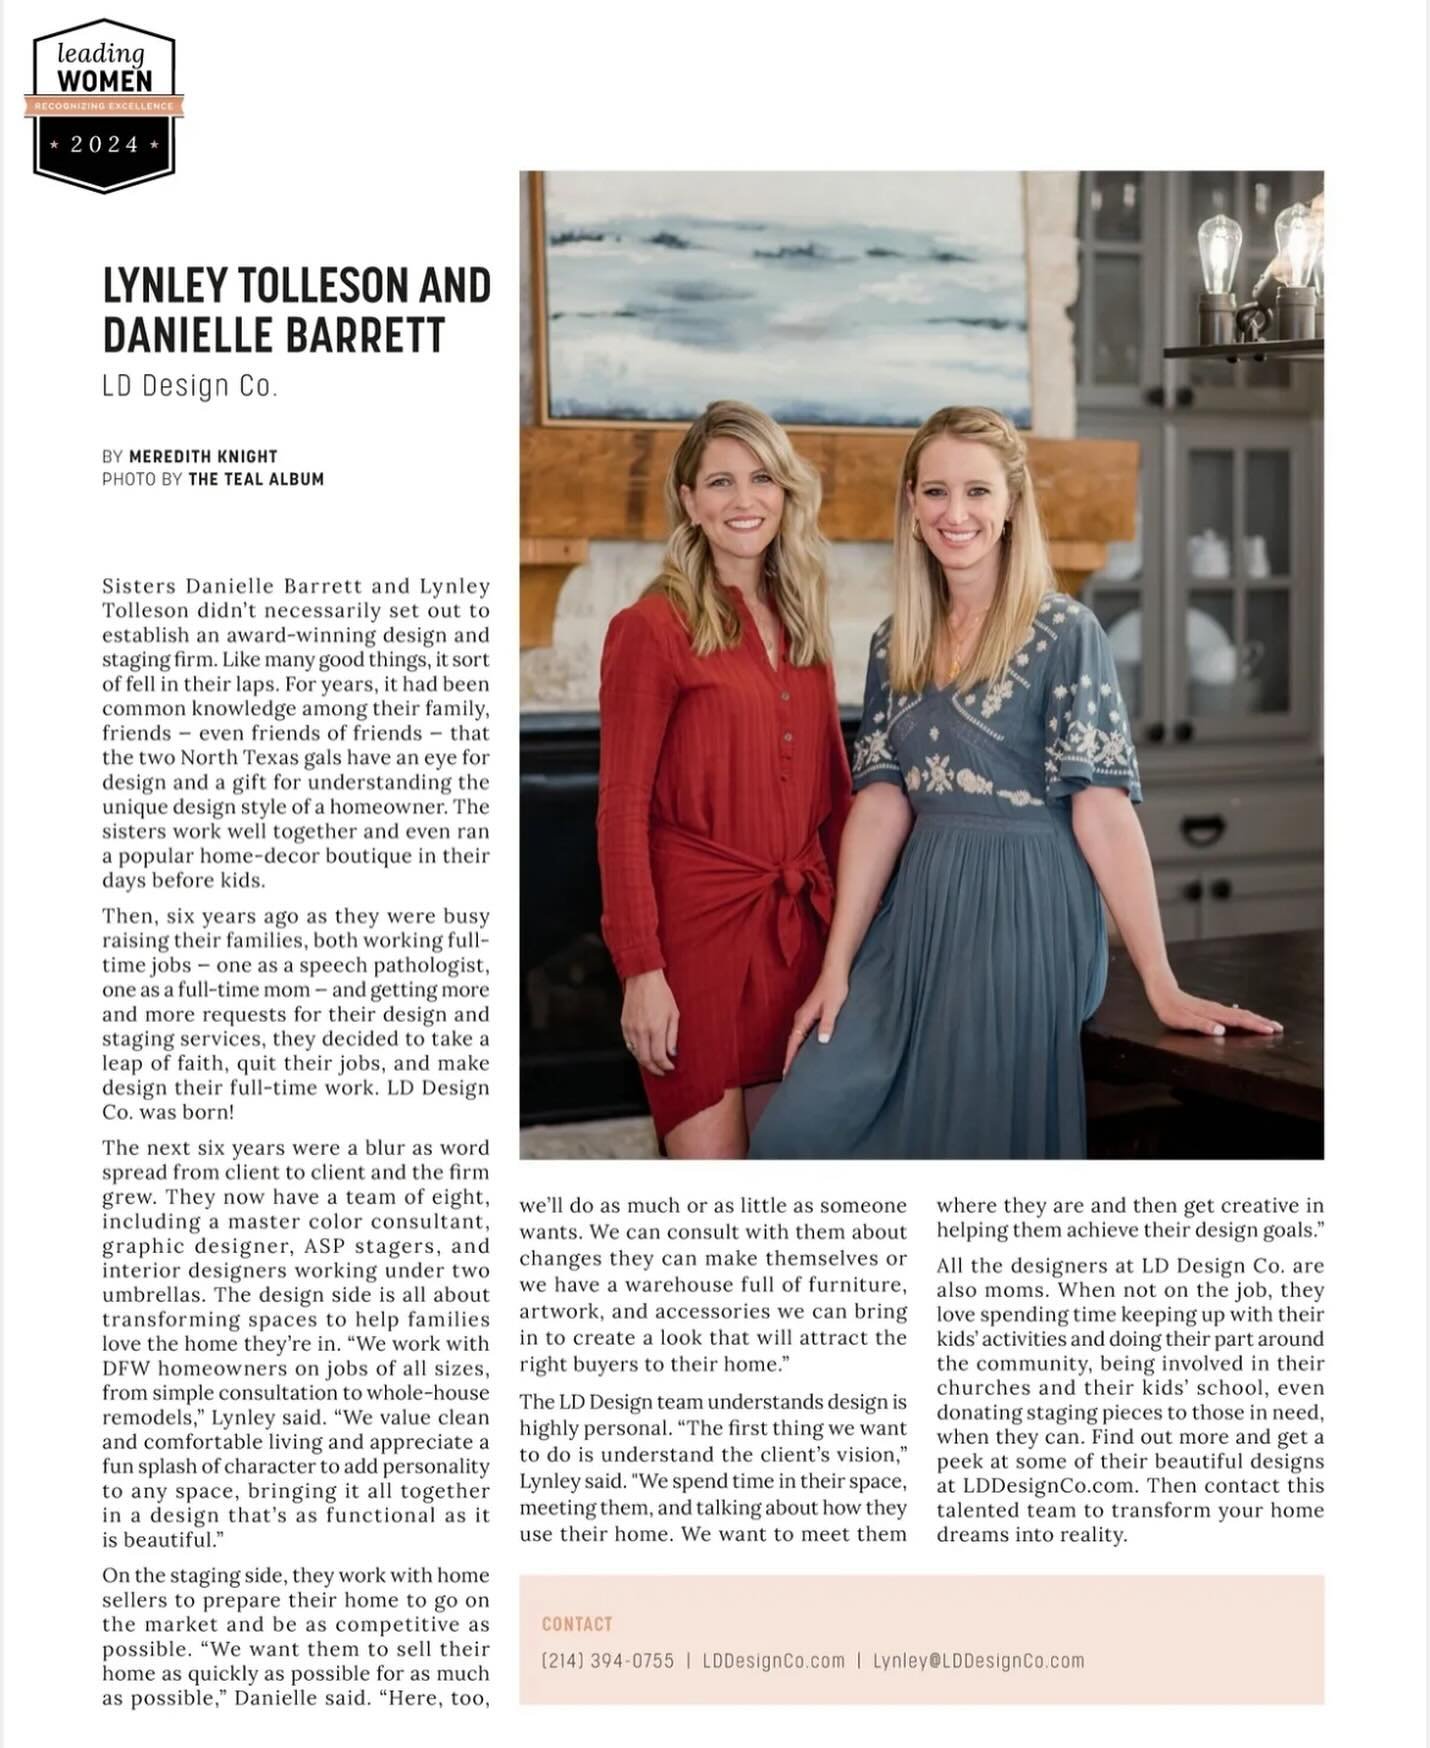 We are so honored to be included in Living Magazine&rsquo;s (McKinney/Allen) special edition featuring Leading Women in the community! 
👏🏼 
We love this community, and we love what we do- helping others create both inspiring and functional spaces f